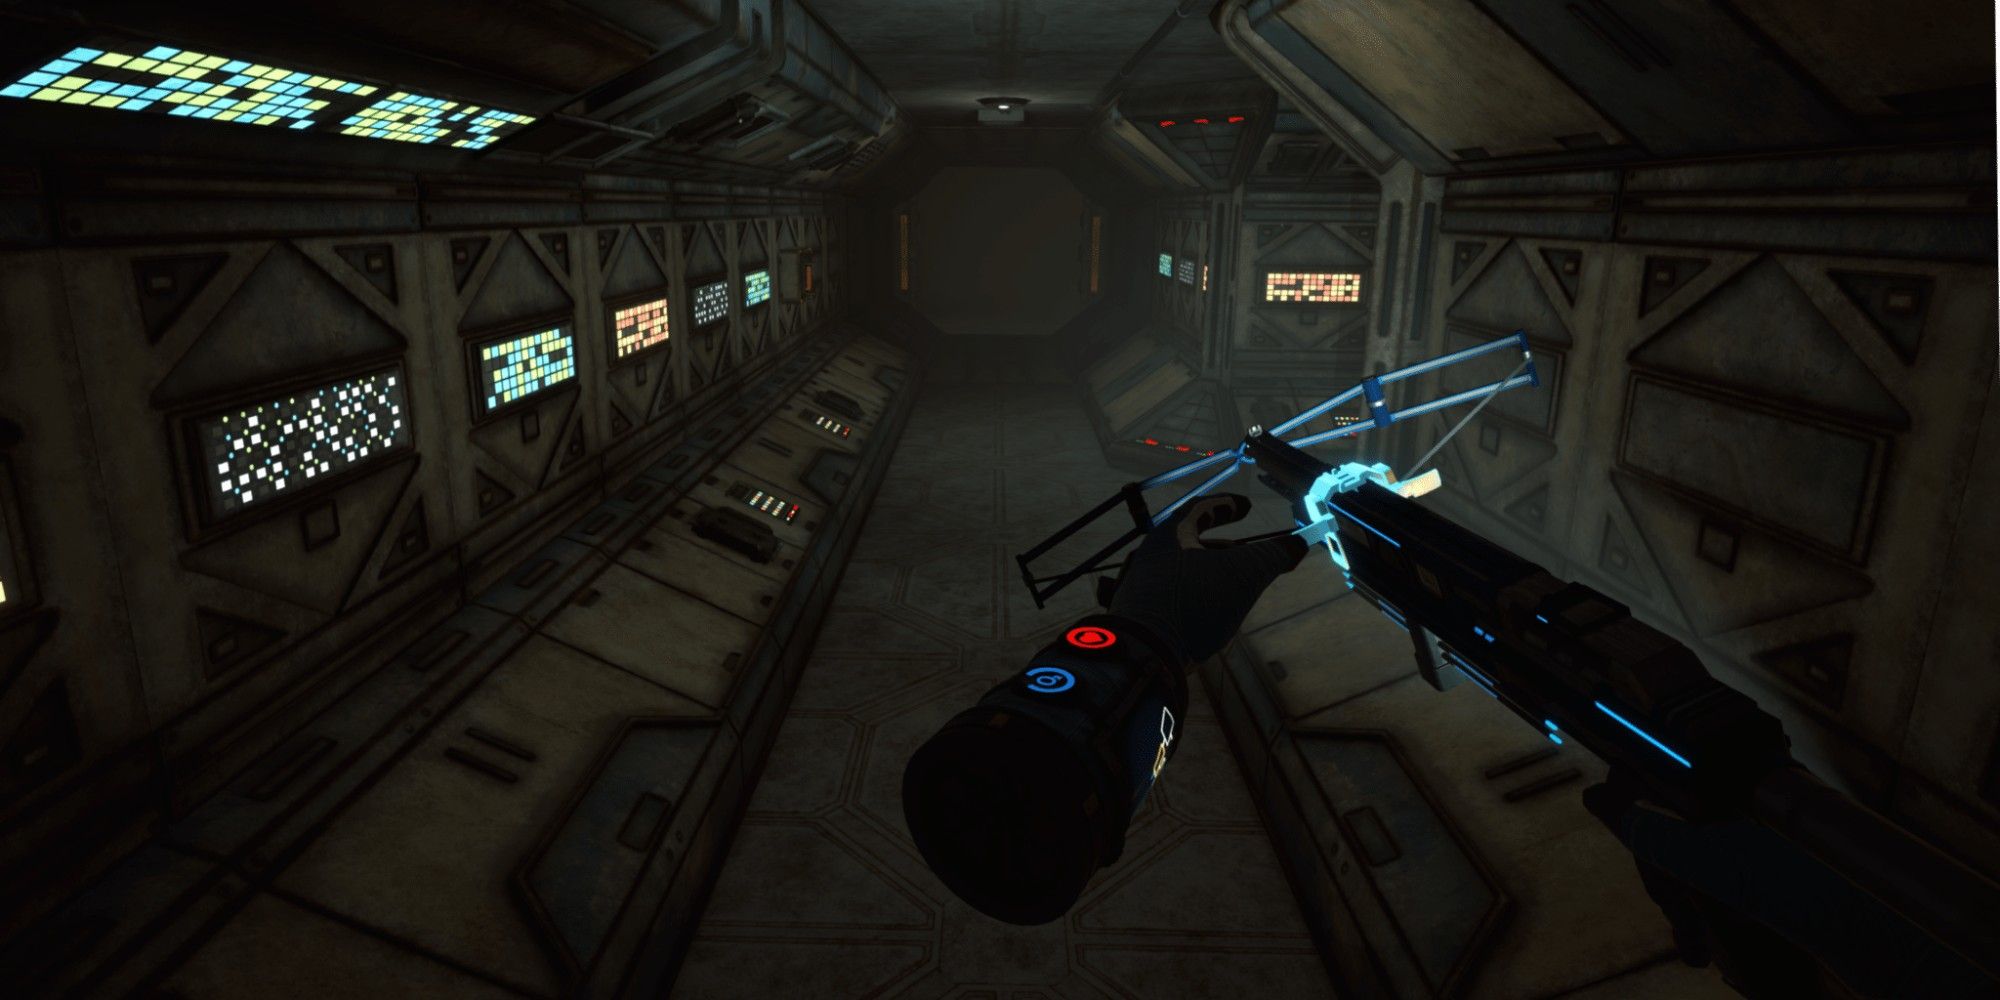 The player fires a crossbow in a hallway in Cosmodread VR